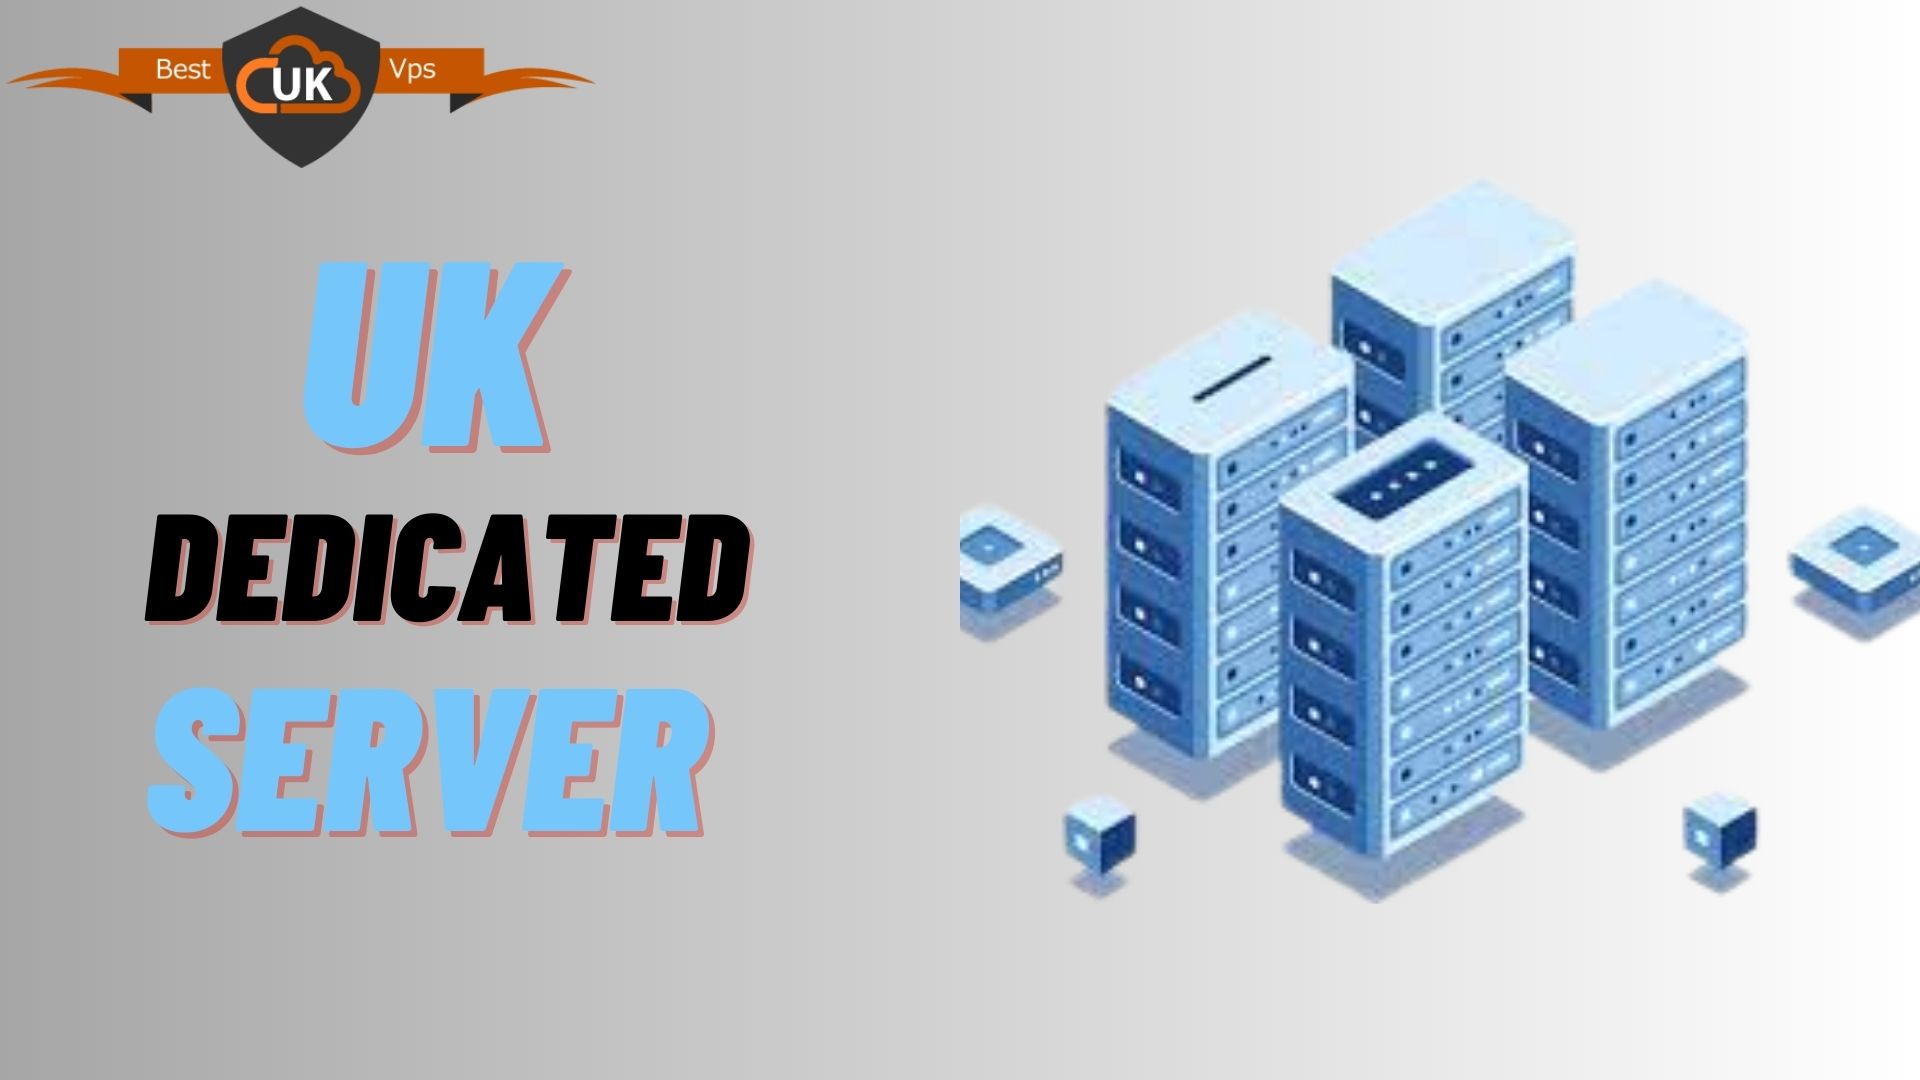 UK Dedicated Server with High-Capacity by using Best UK VPS